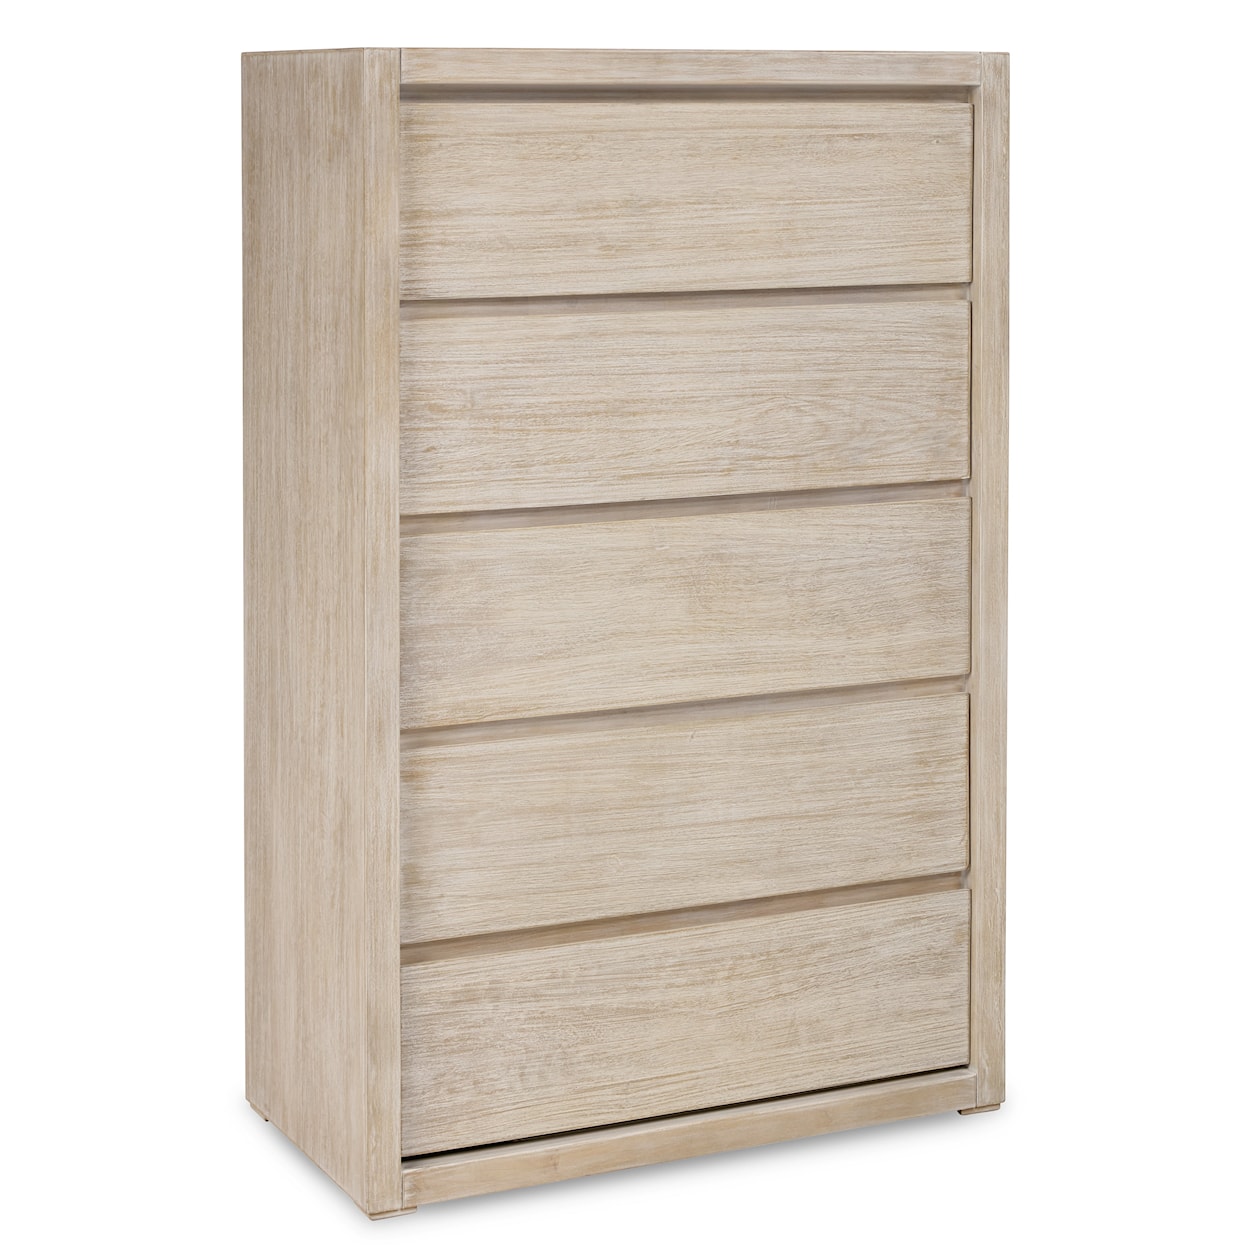 Ashley Furniture Michelia Chest of Drawers